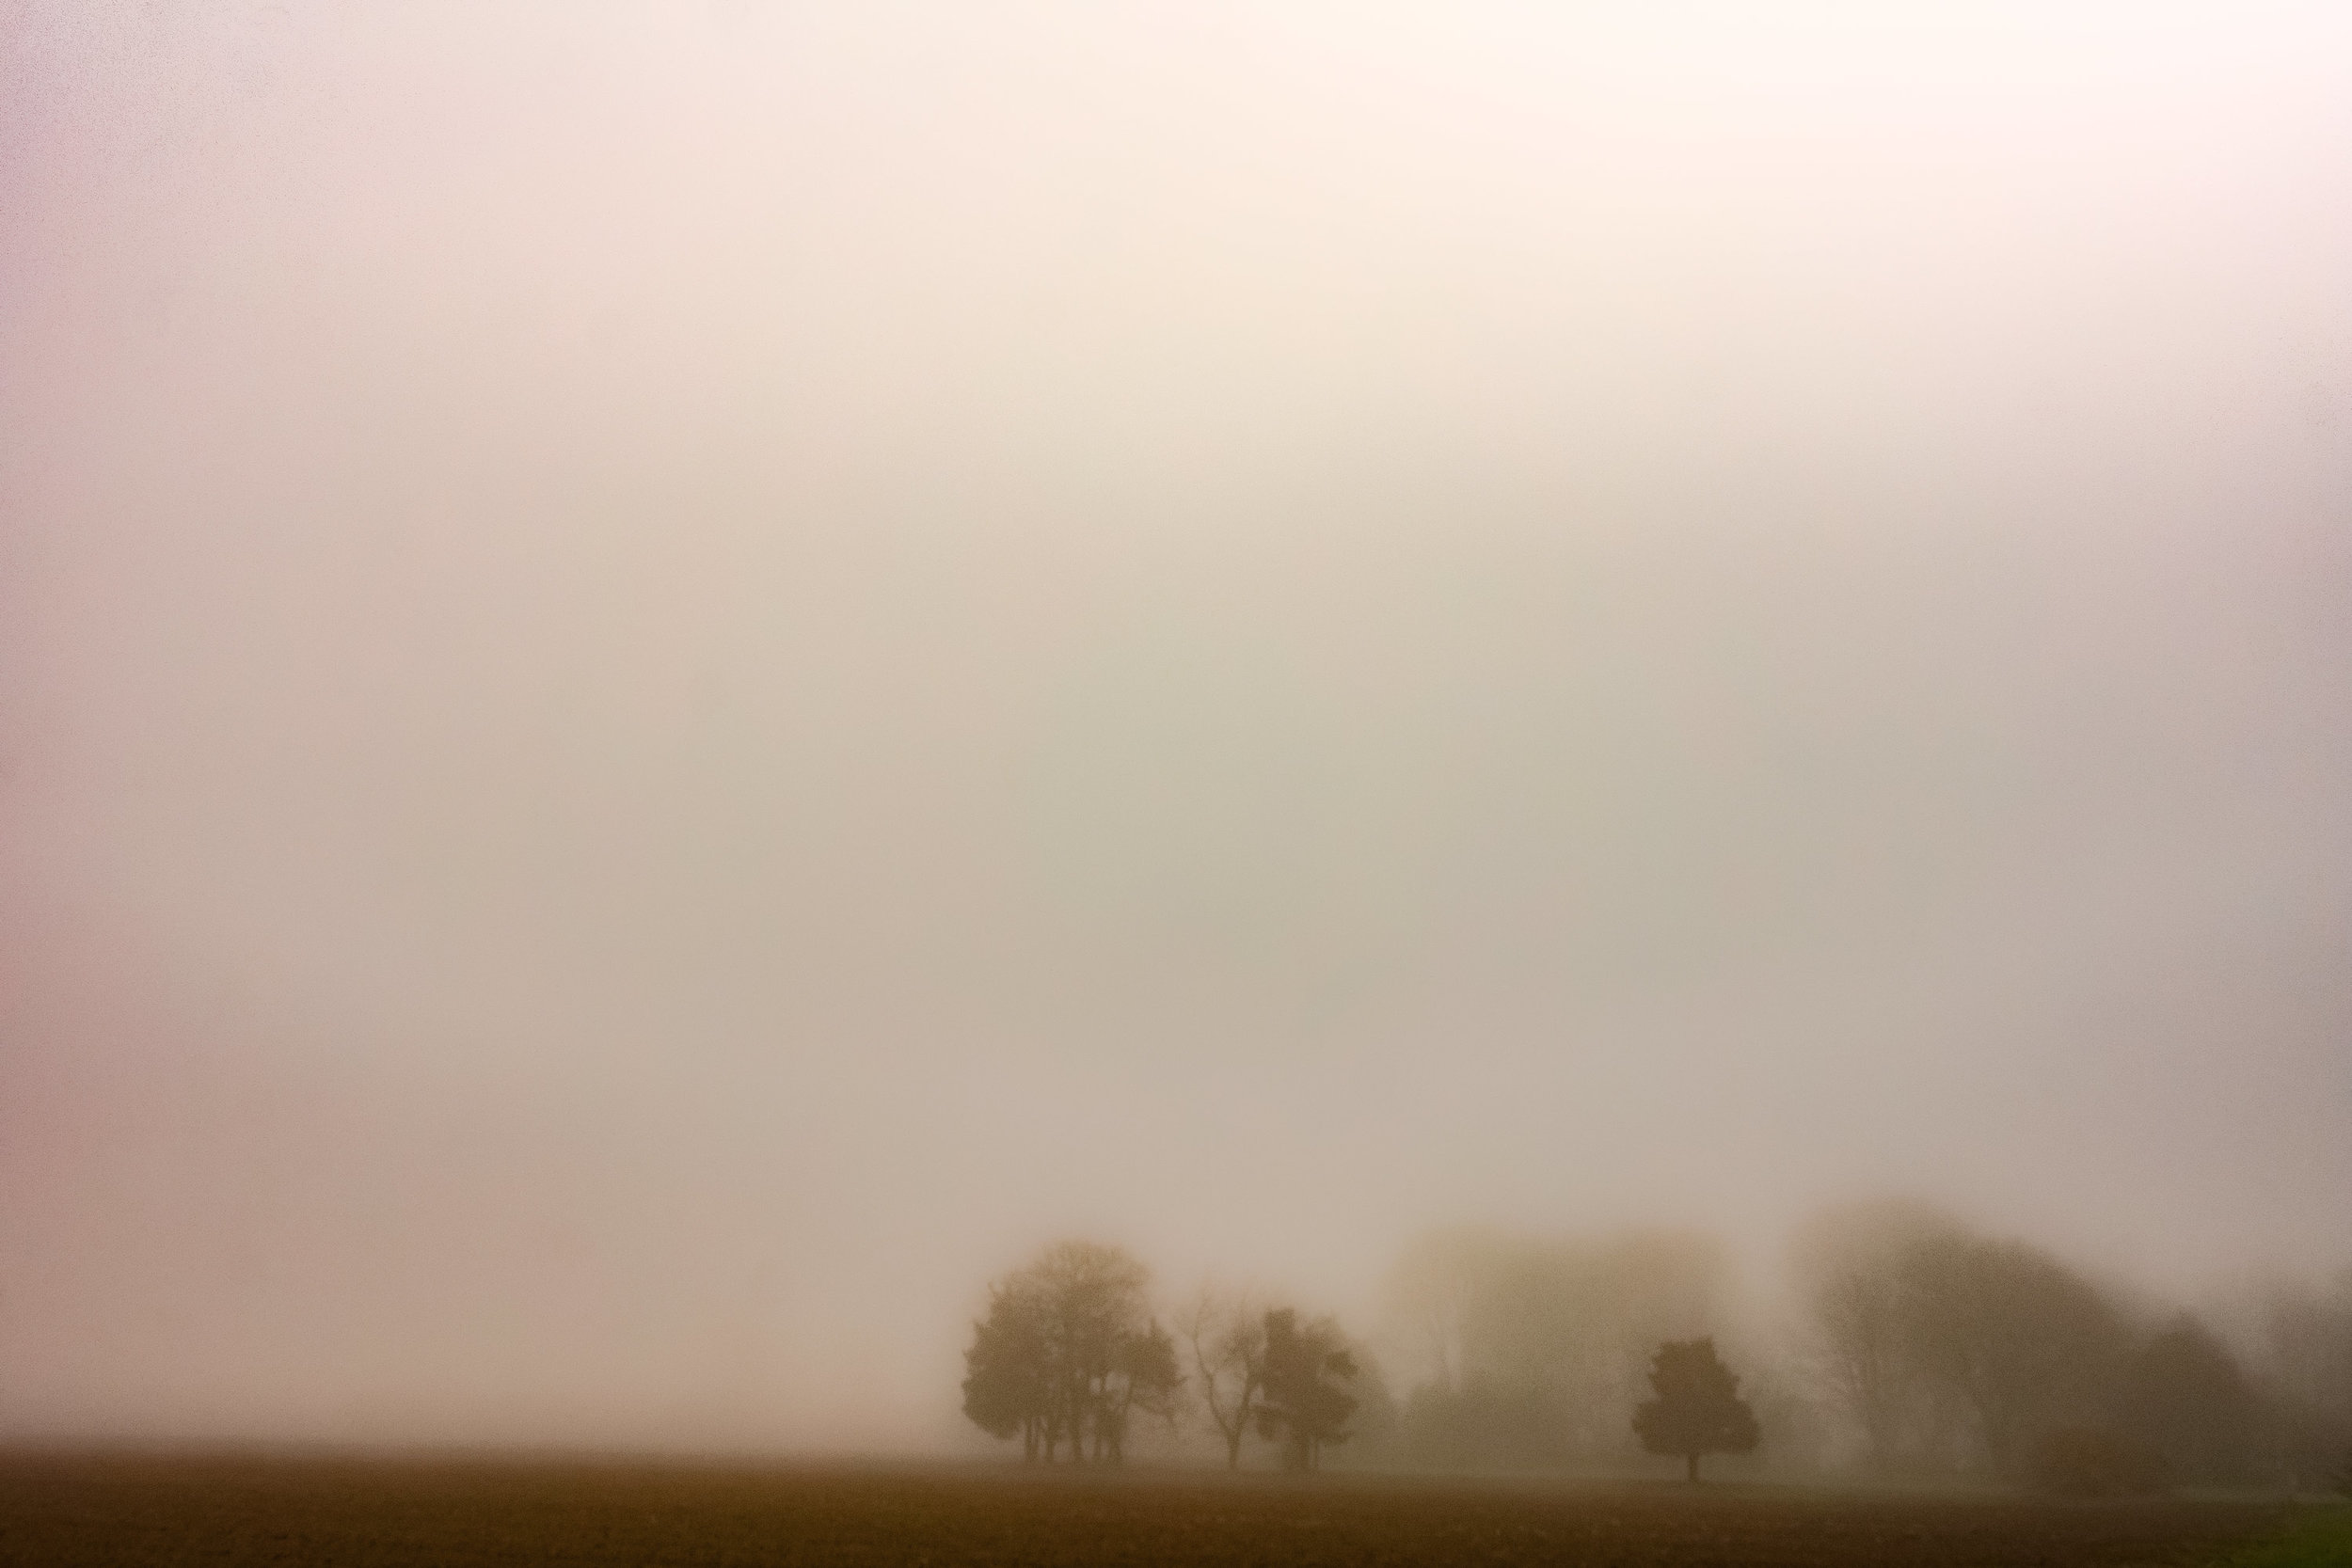 Fog over Sagaponack, 2019, print, 40 x 60 in, $6,000 (other sizes available)